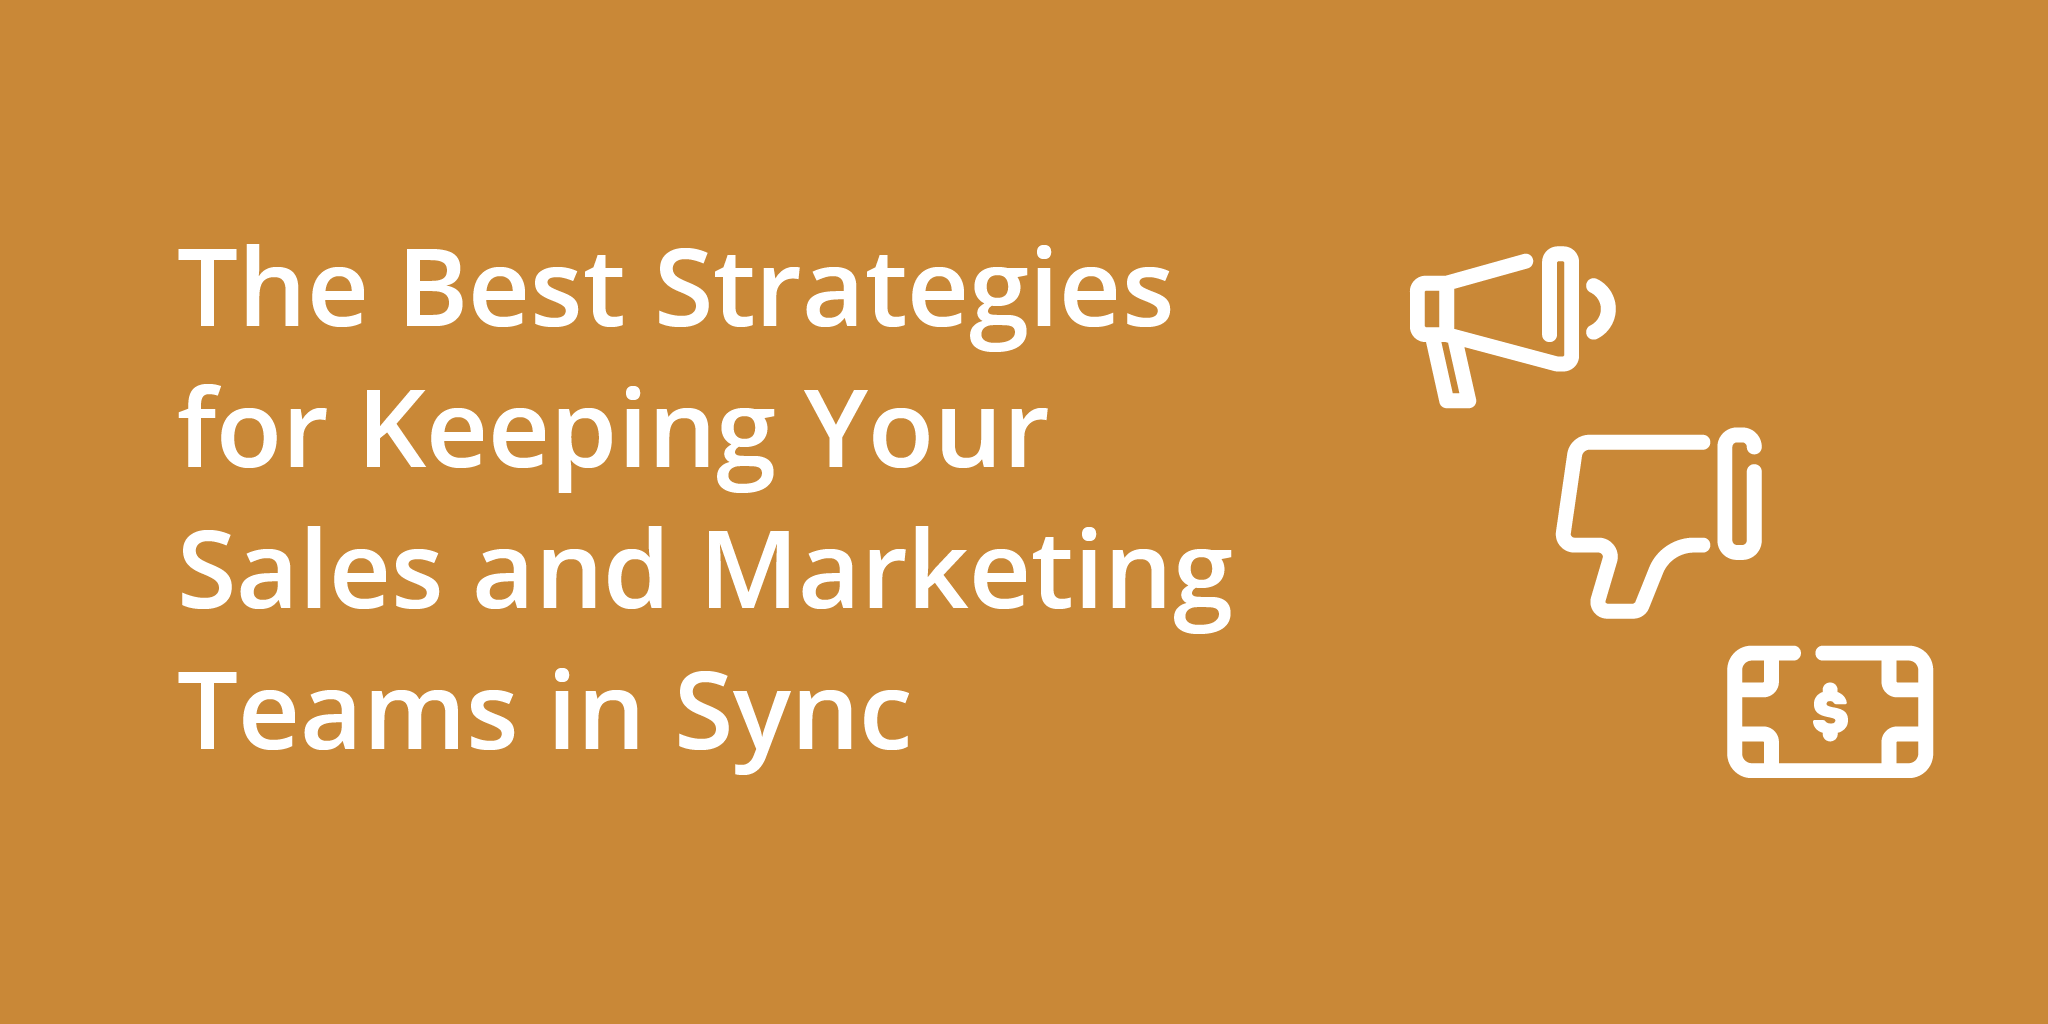 The Best Strategies for Keeping Your Sales and Marketing Teams in Sync | Telephones for business